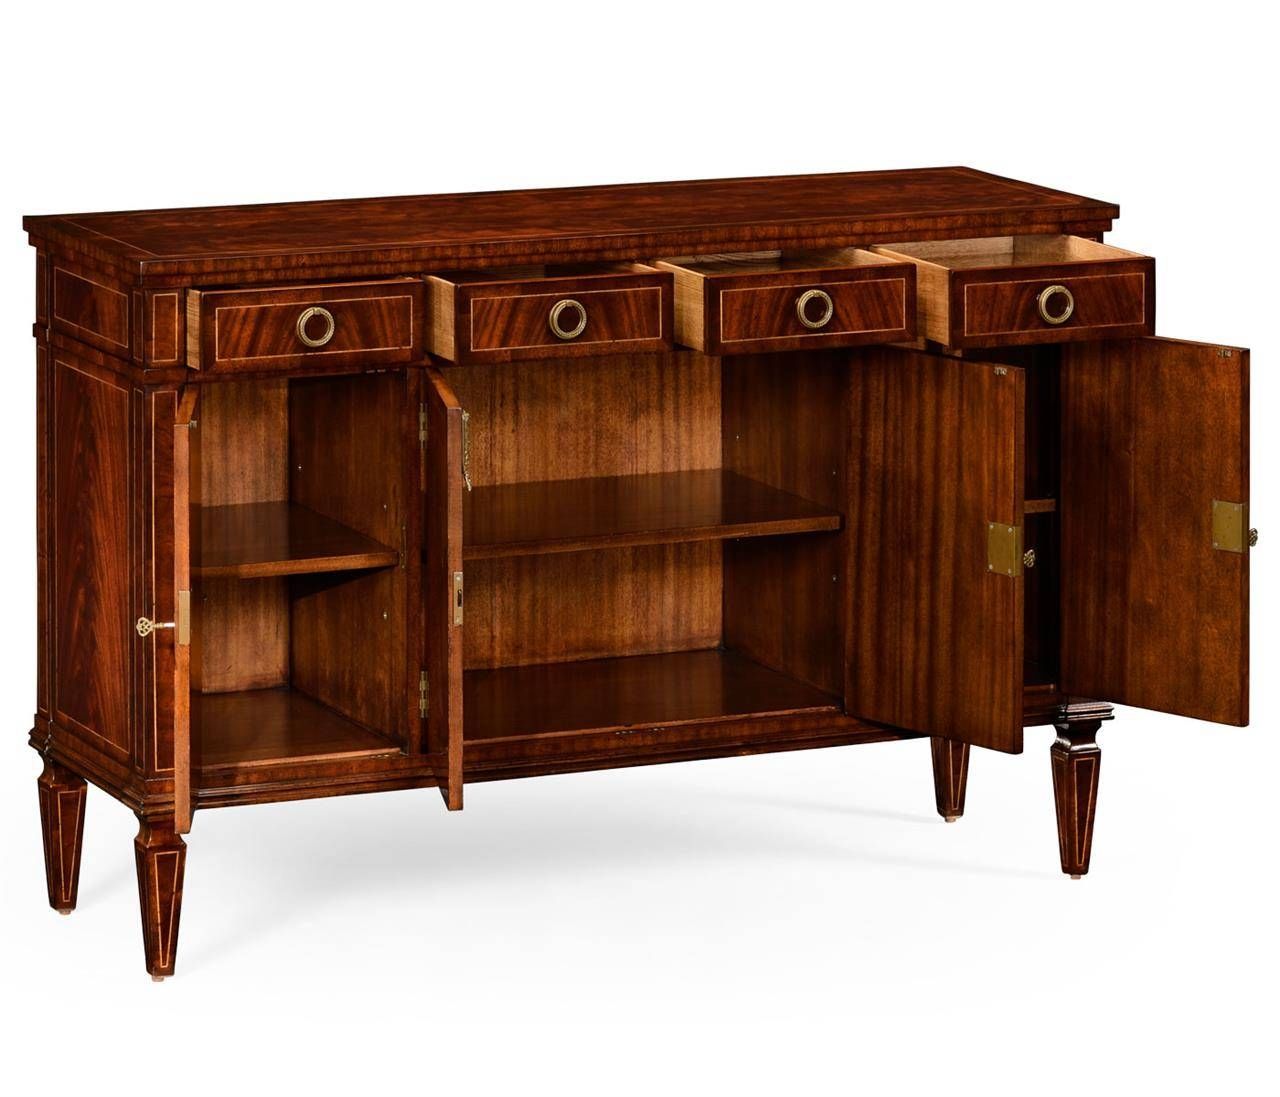 Luxurious Mahogany Sideboard With Inlay Throughout Mahogany Sideboards (View 7 of 15)